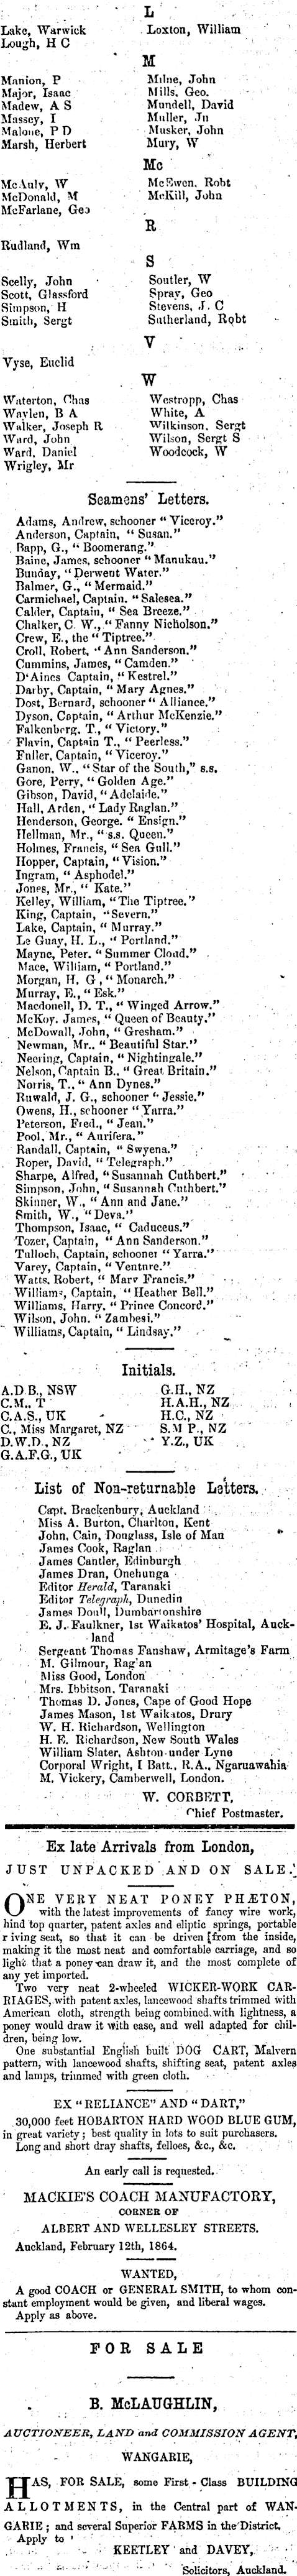 Papers Past Newspapers New Zealander 5 April 1864 Page 4 Advertisements Column 5